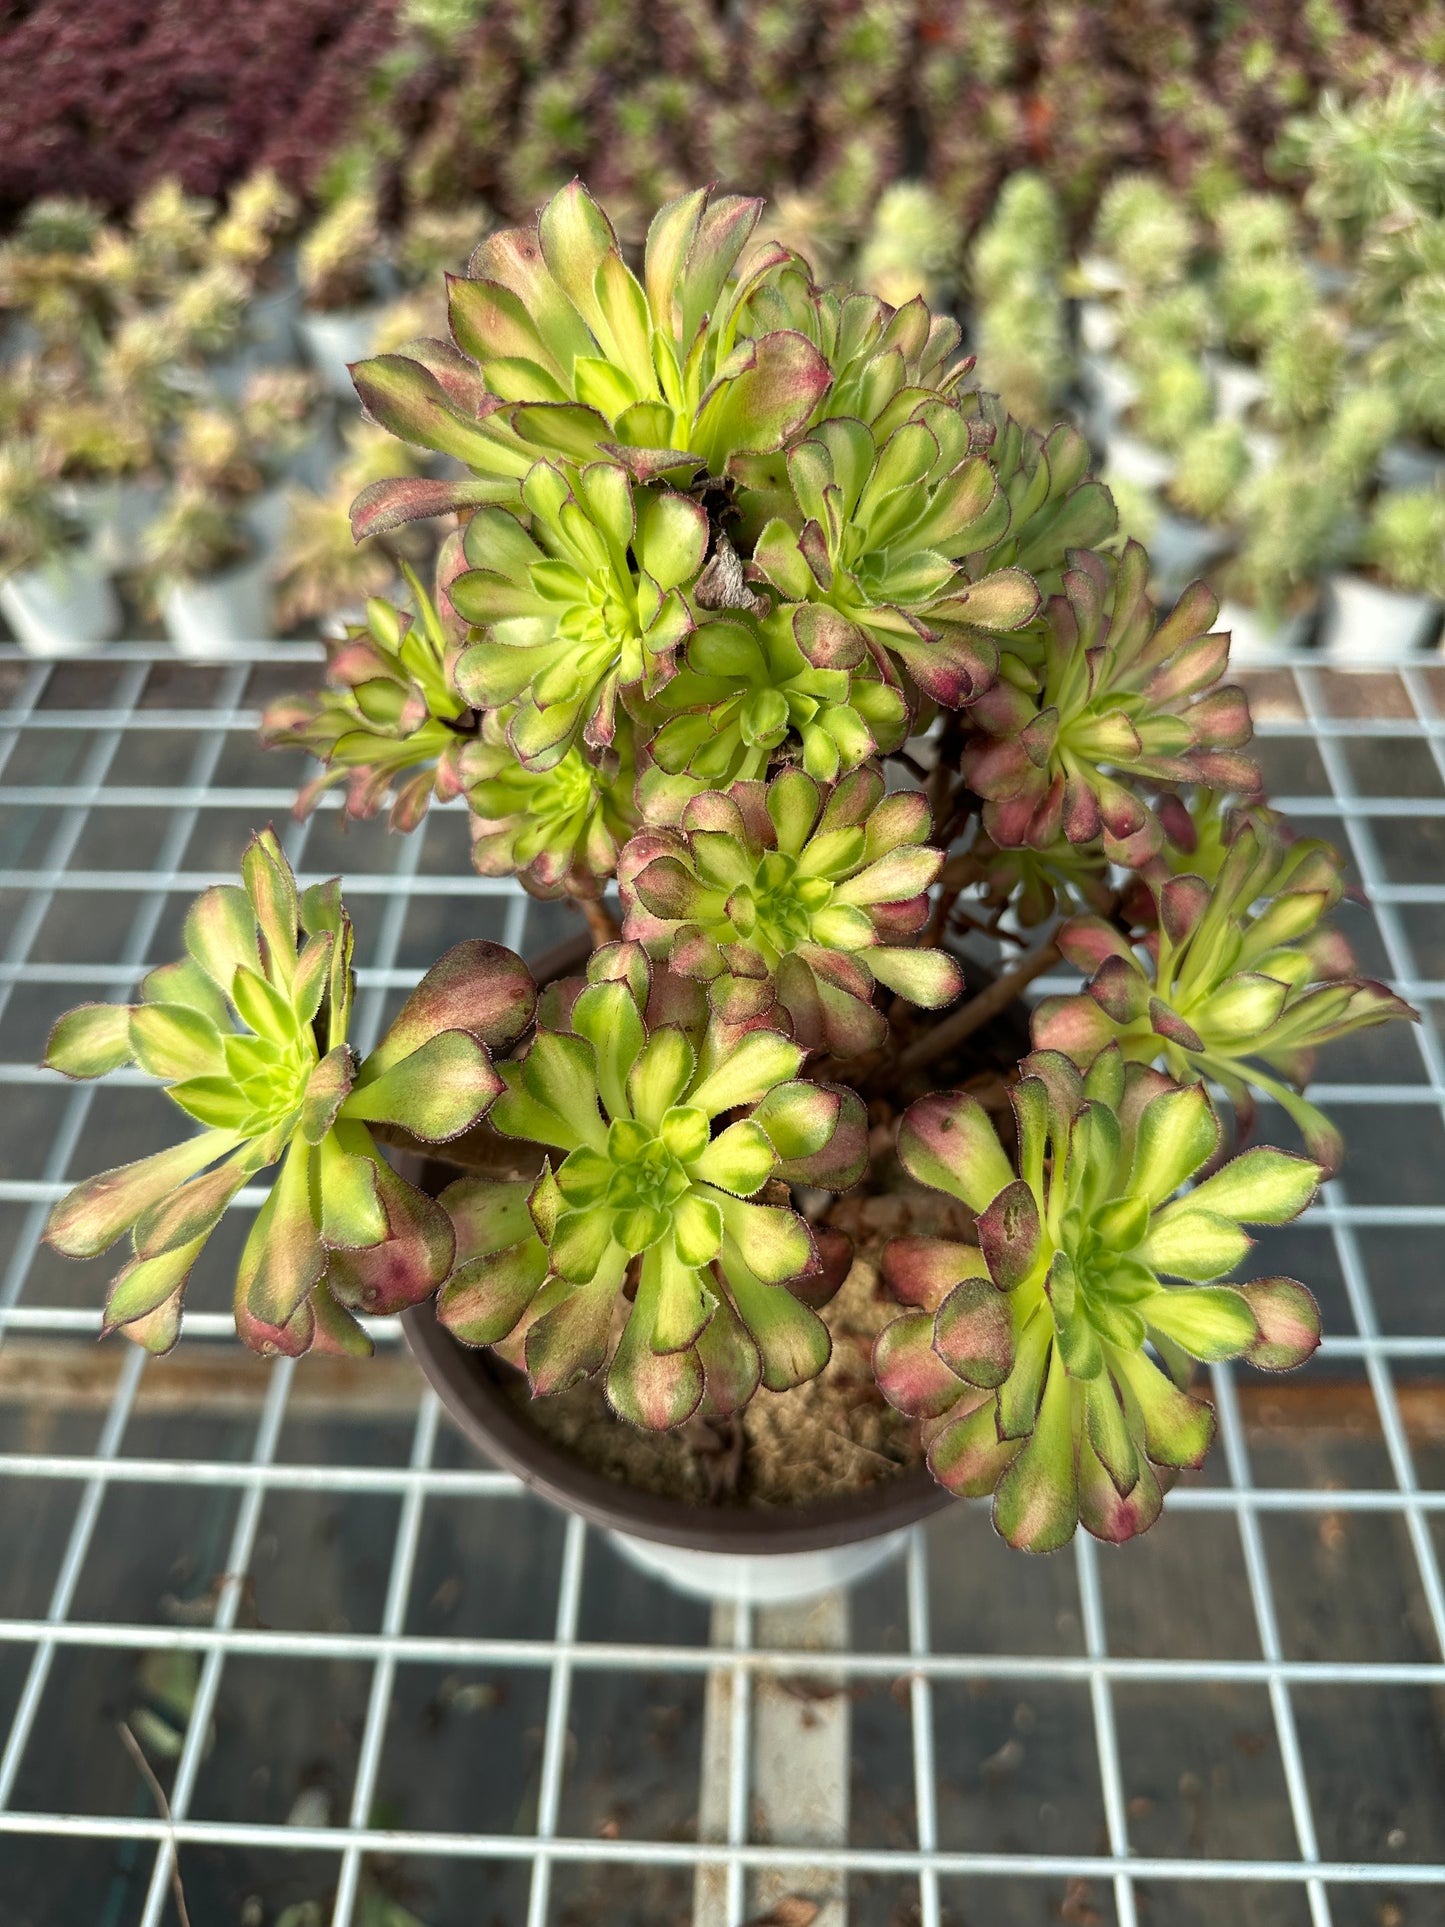 Tongyan cluster20-30cm Old pile/ 10-20 heads/ Aeonium cluster / Variegated Natural Live Plants Succulents